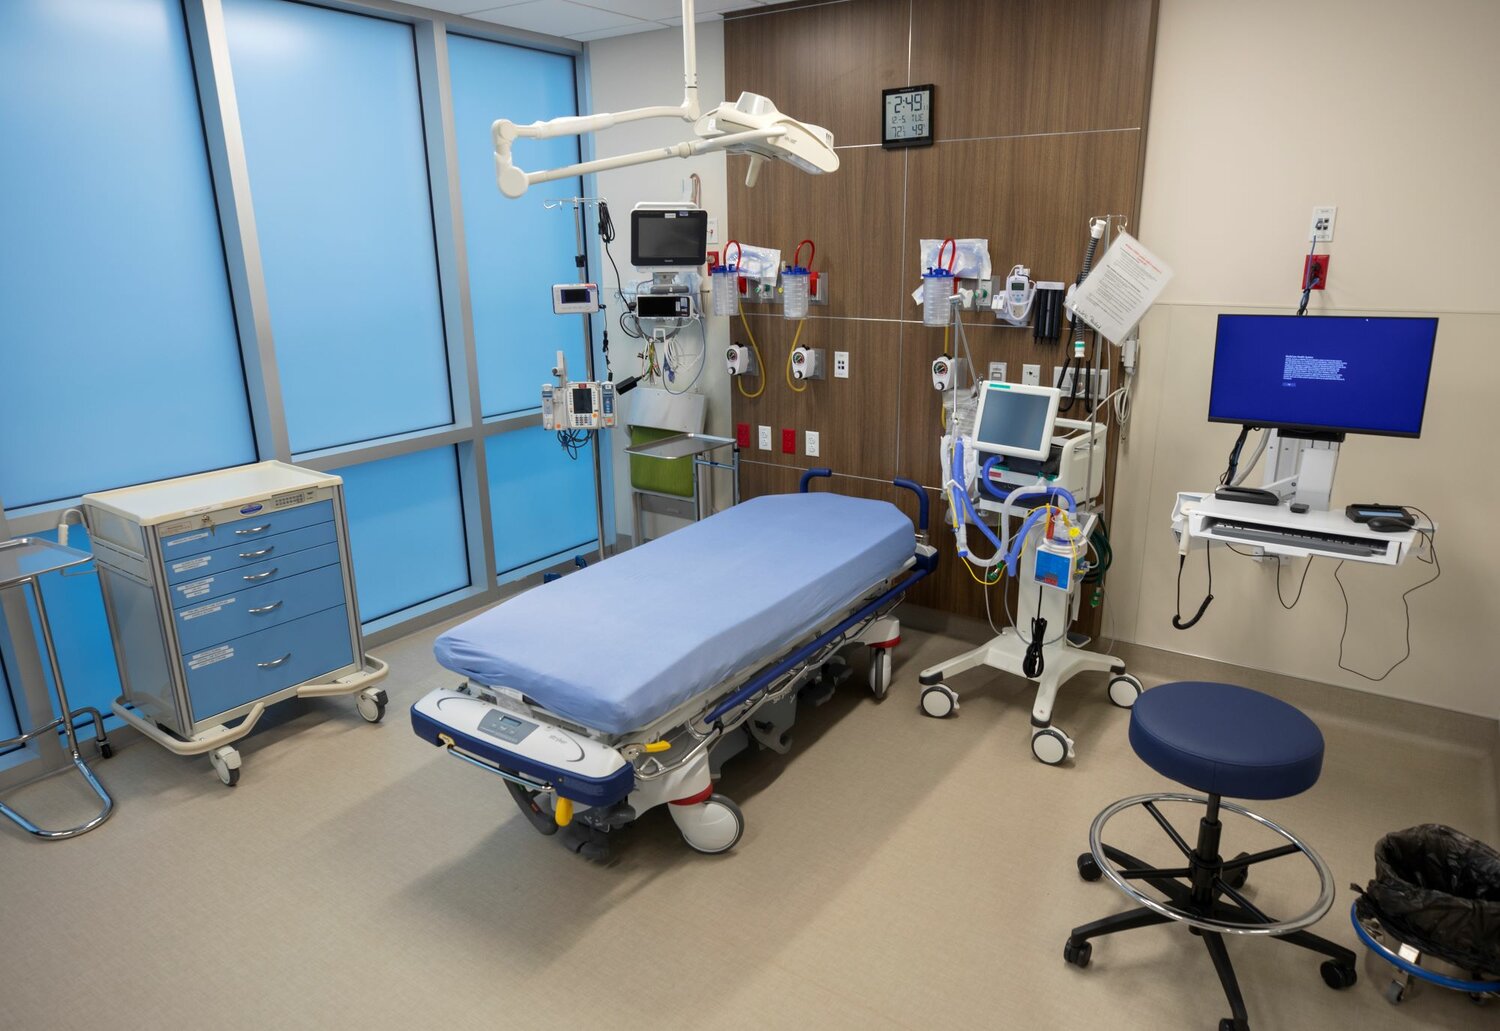 One of the beds at the new ER. Image from the ribbon-cutting event for the new MultiCare Emergency Hospital in Lacey, Washington, taken on Tuesday, Dec. 5, 2023.